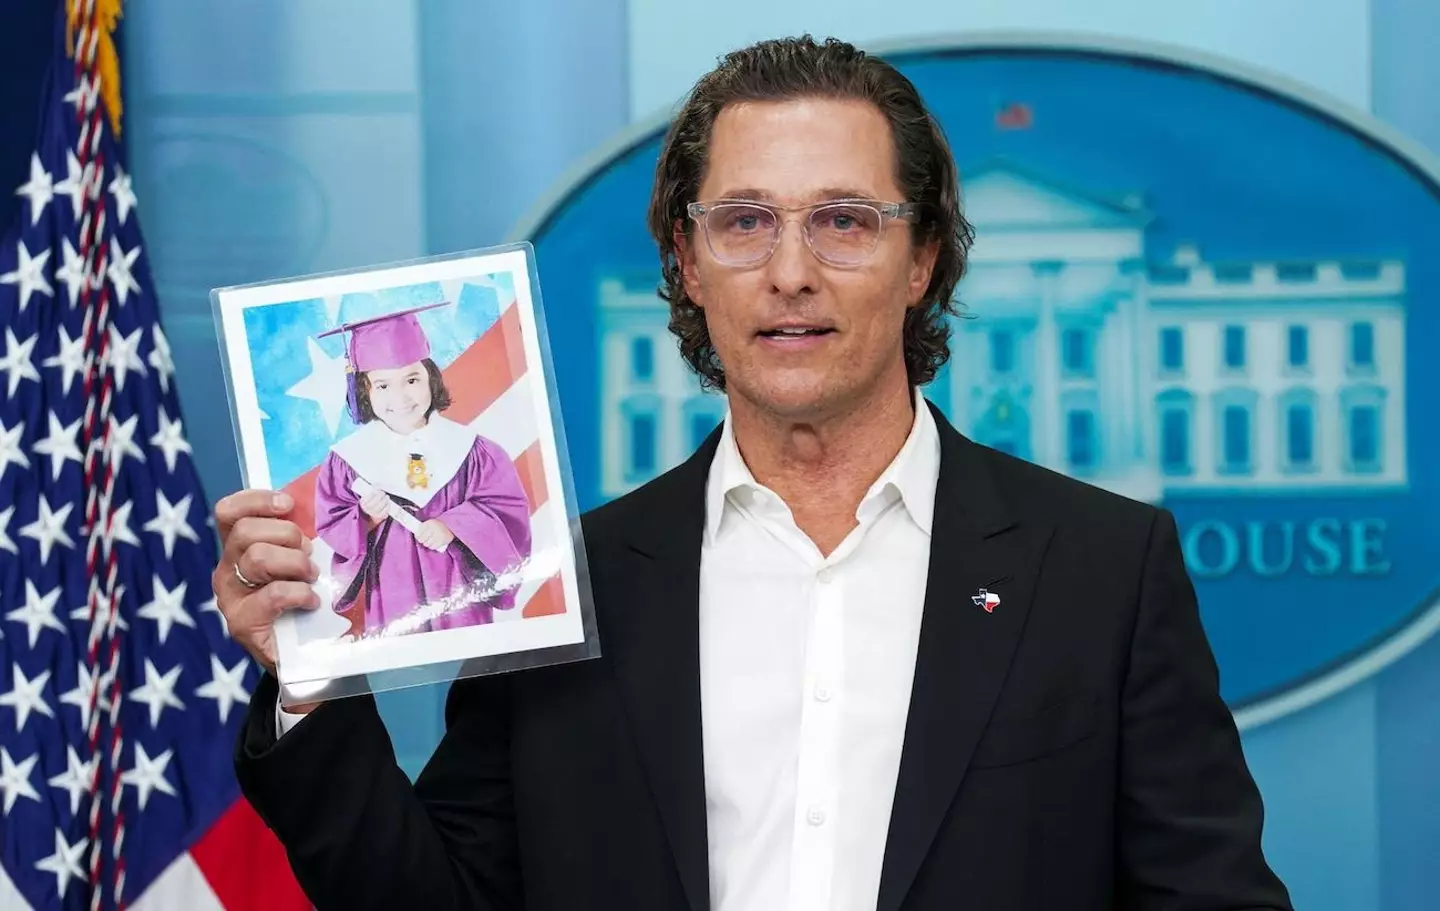 Actor Matthew McConaughey holds a picture of 10-year-old school shooting victim Alithia Ramirez.